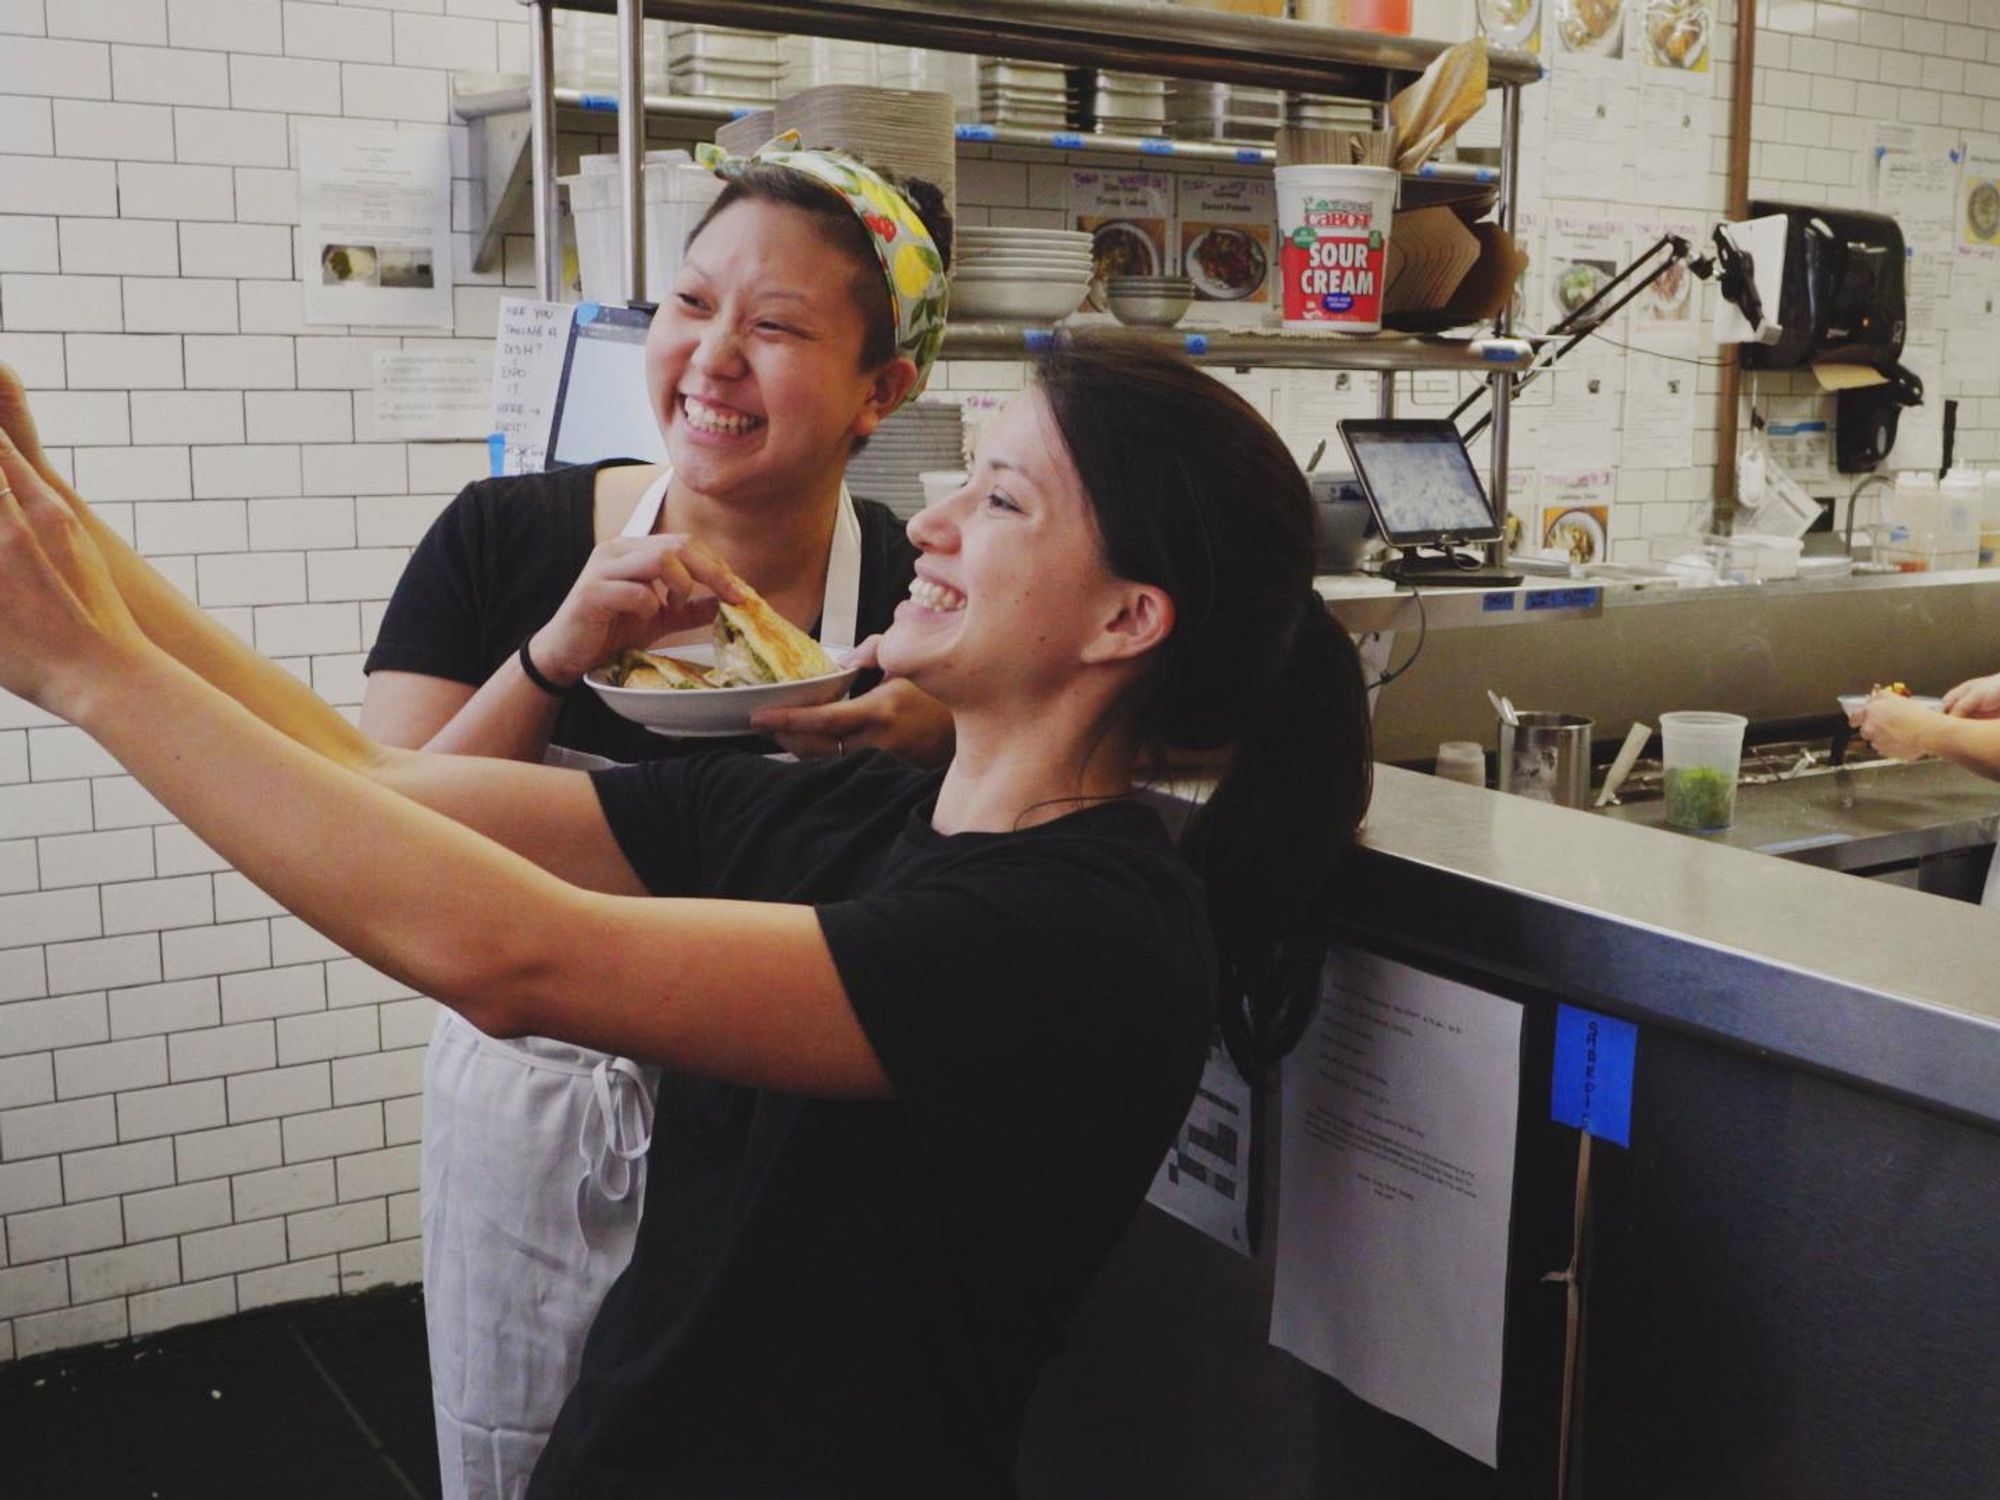 Tastemade Gobbles Up ChefsFeed as the Two Tap Foodie Culture